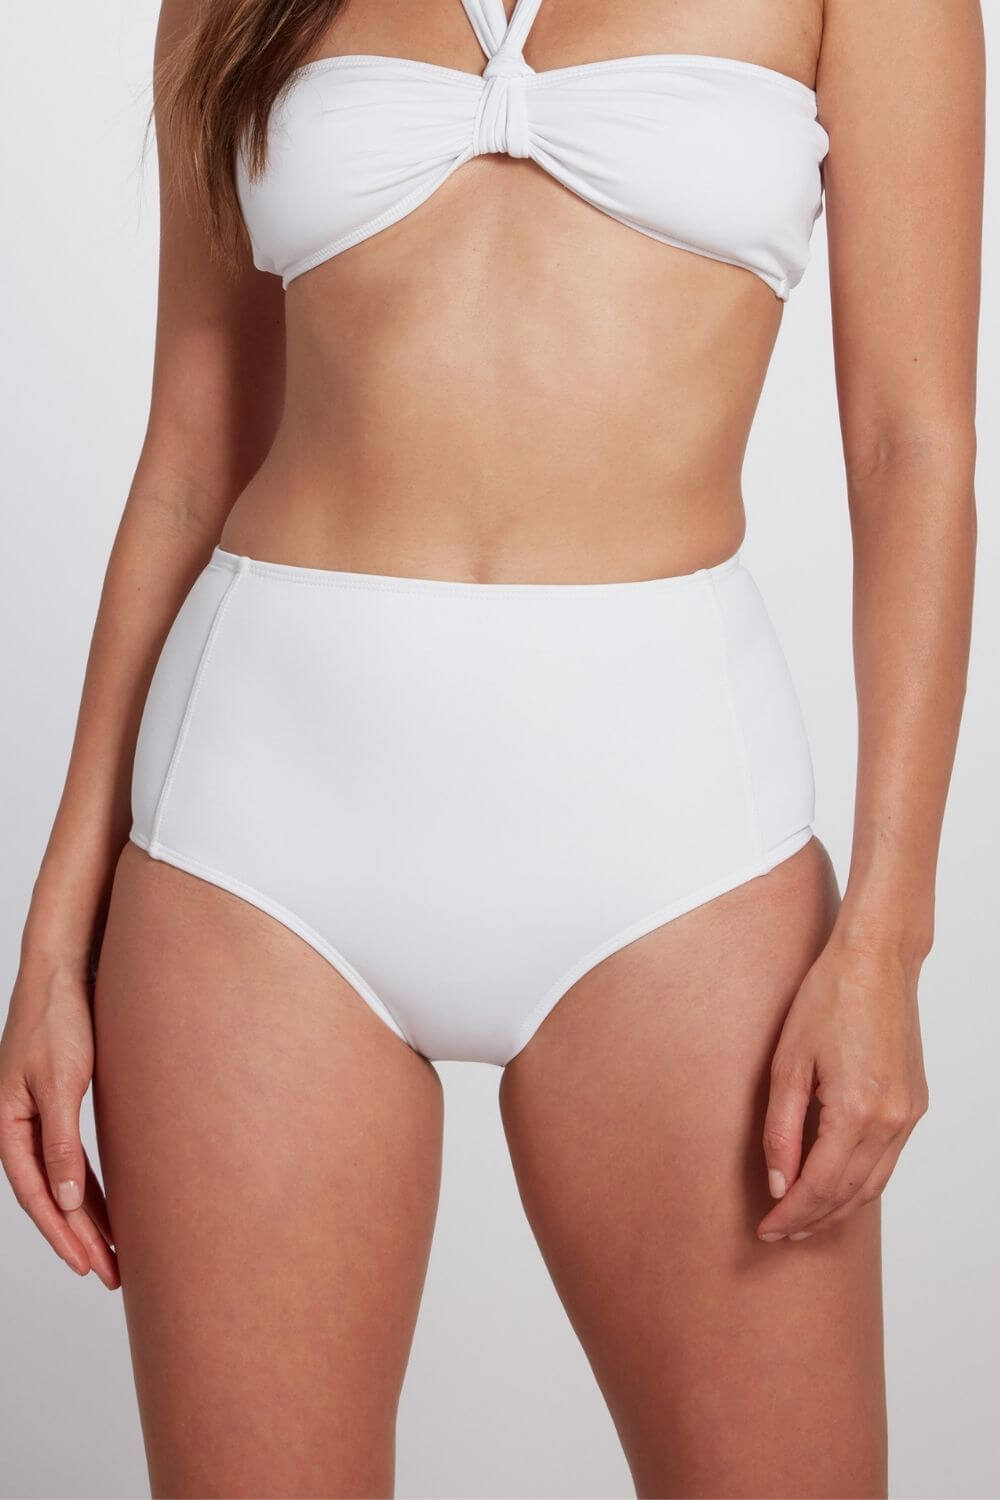 The Bianca retro high waisted bikini bottom in white is double-lined.